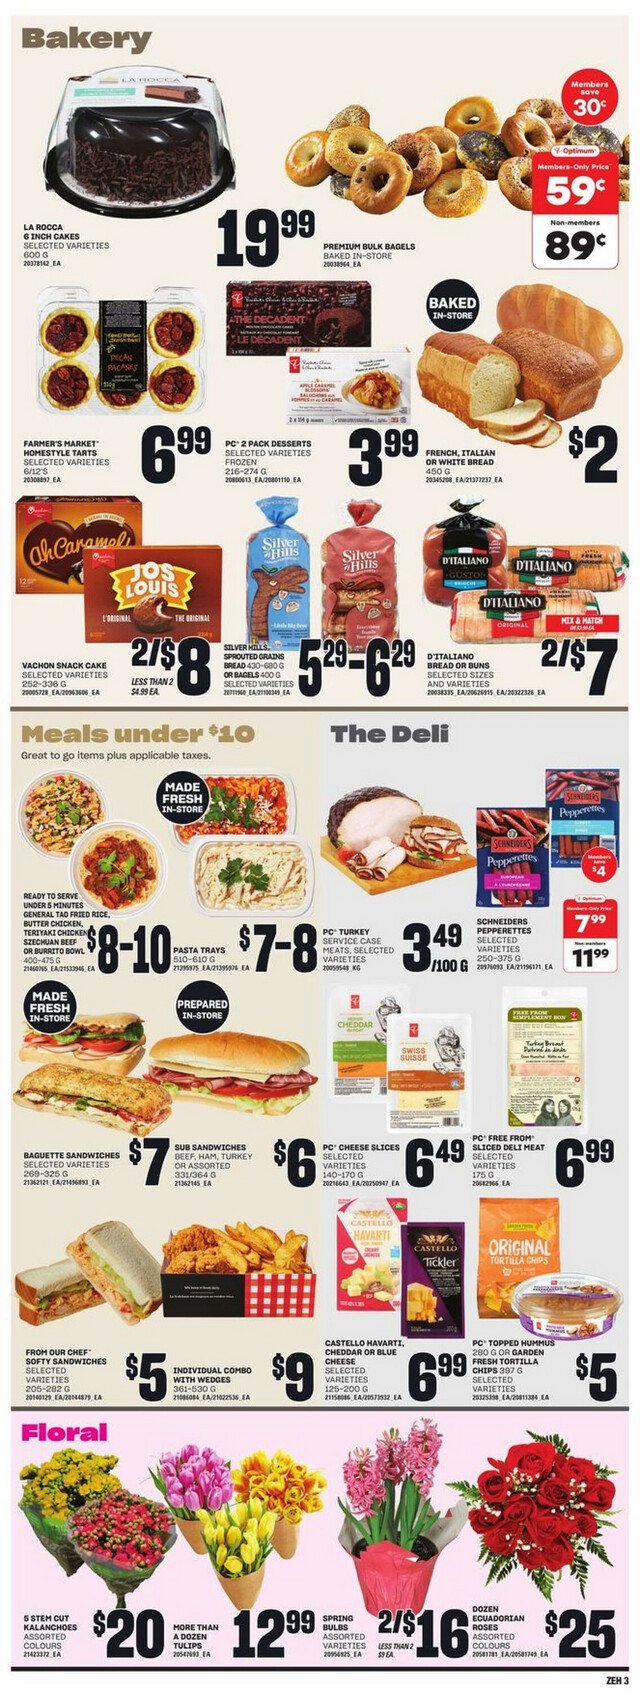 Zehrs Flyer from 04/04/2024